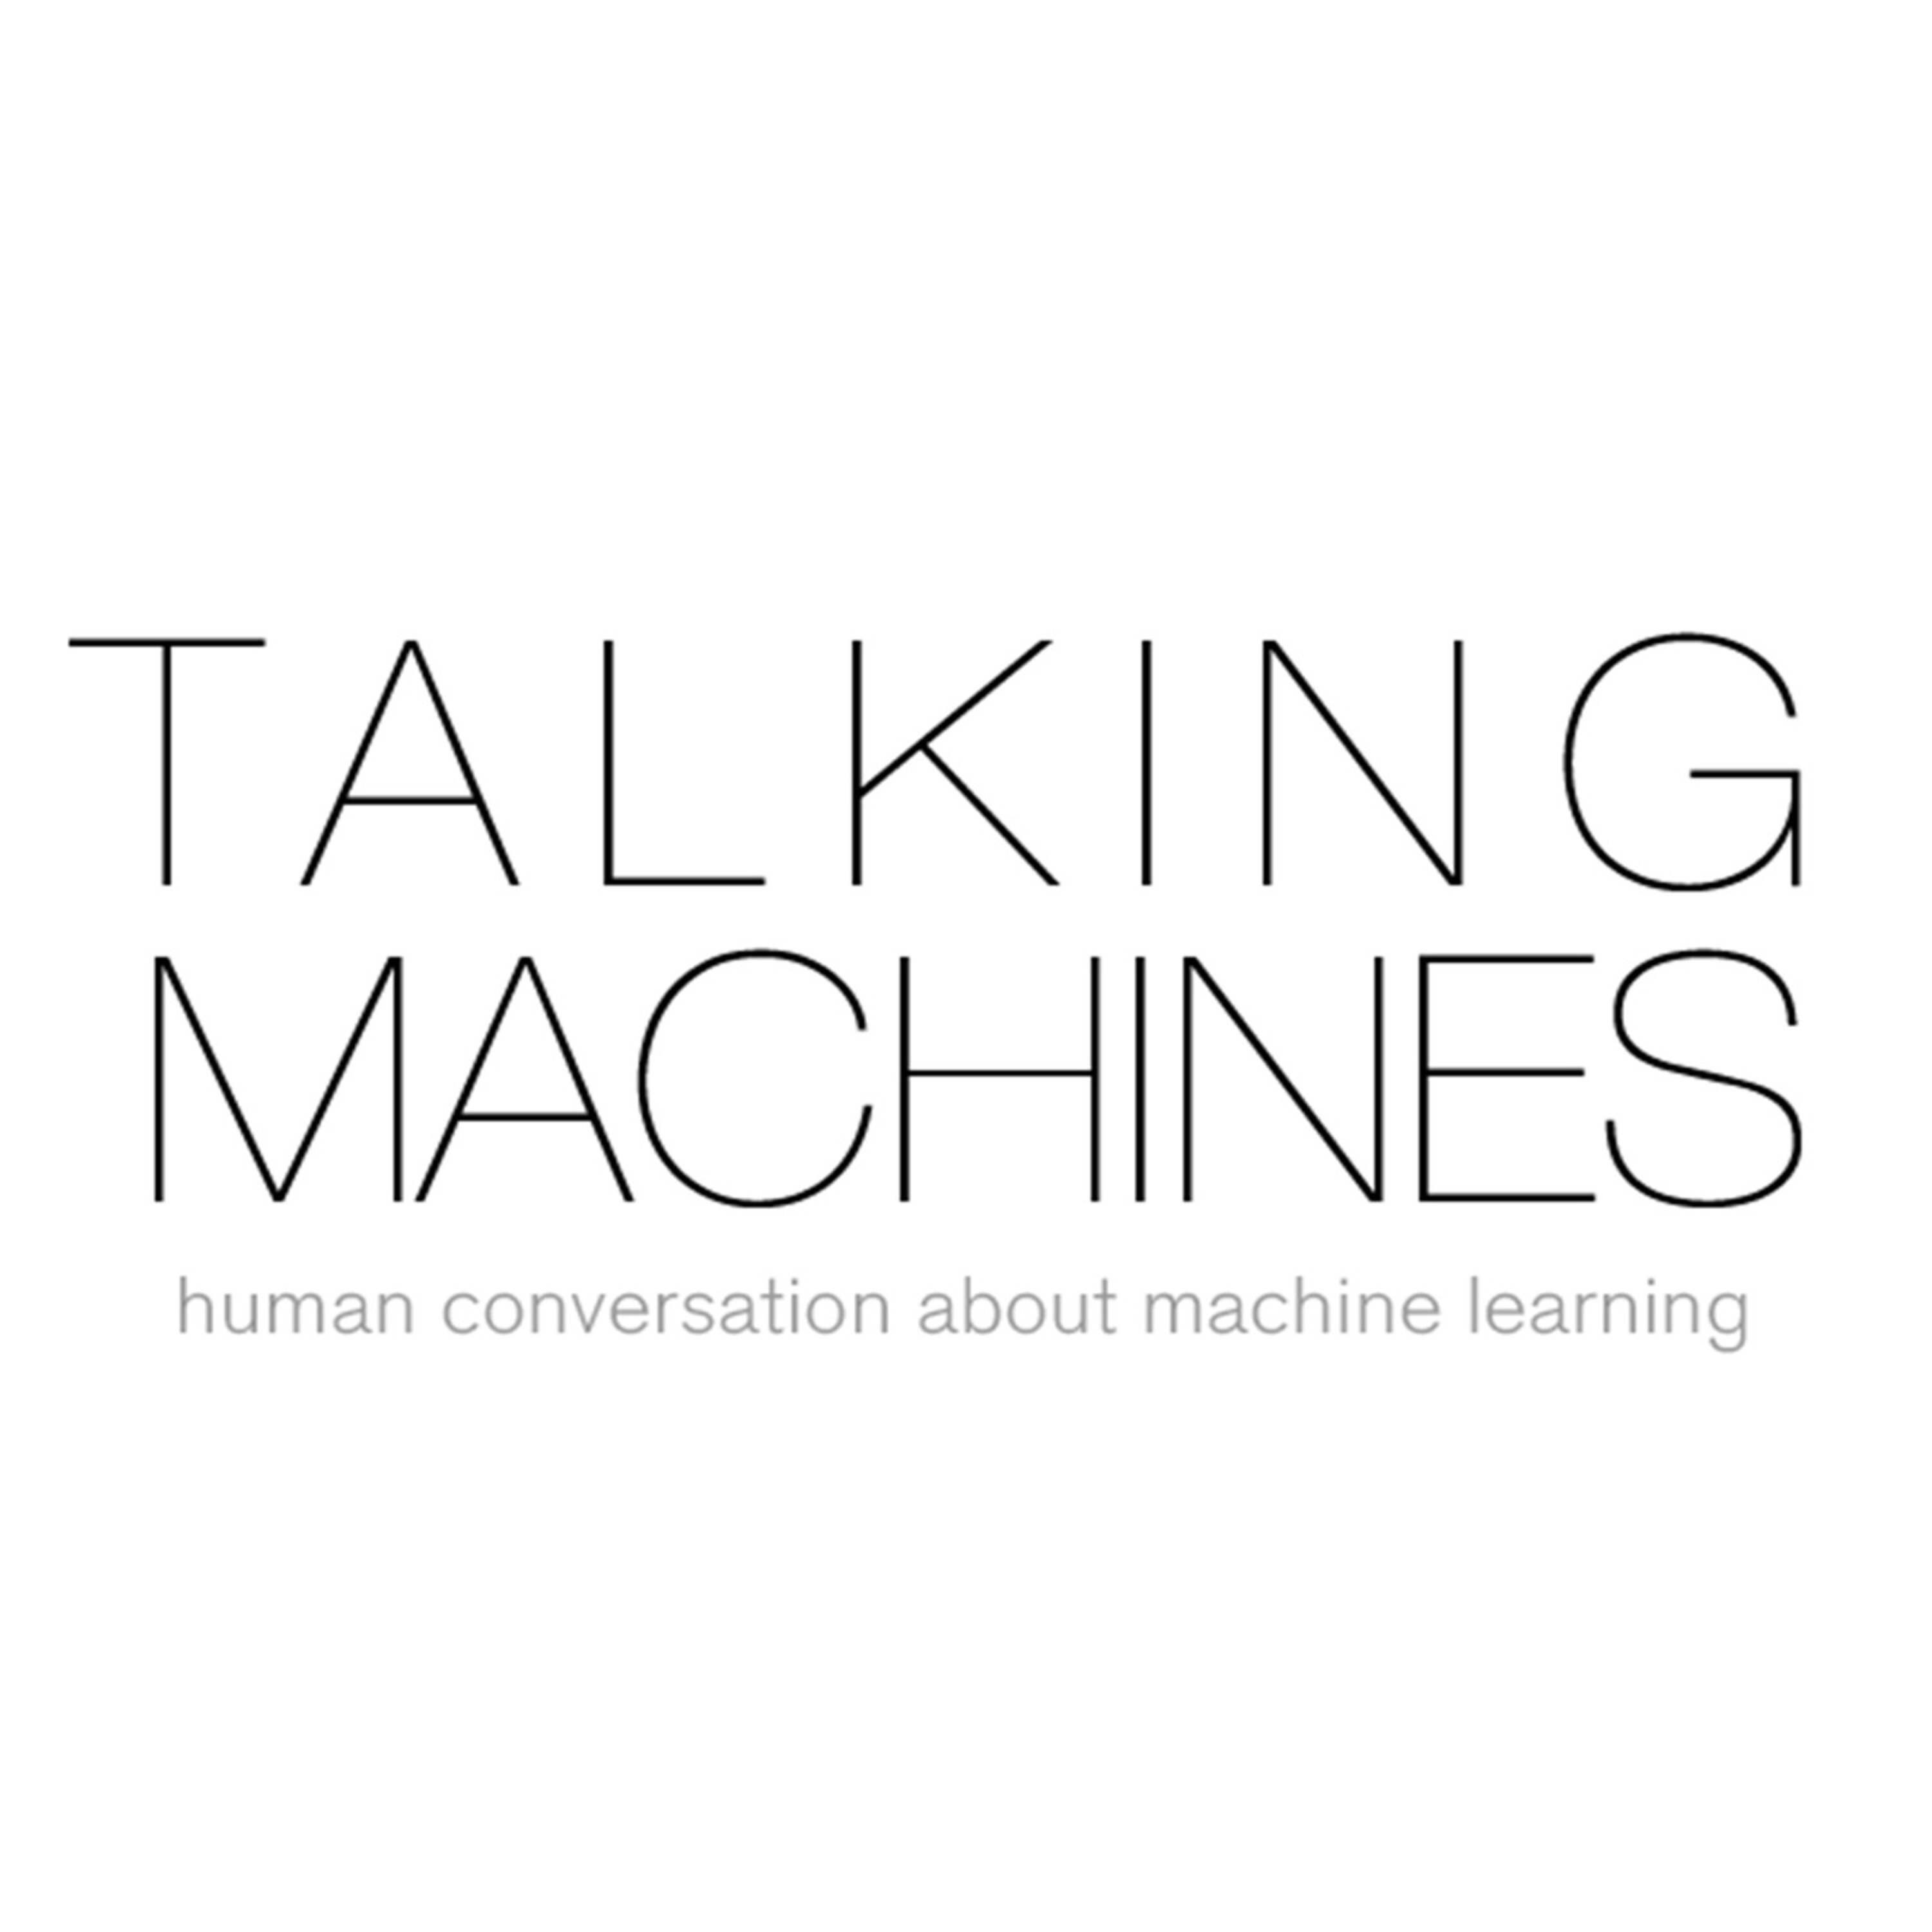 Common Sense Problems and Learning about Machine Learning